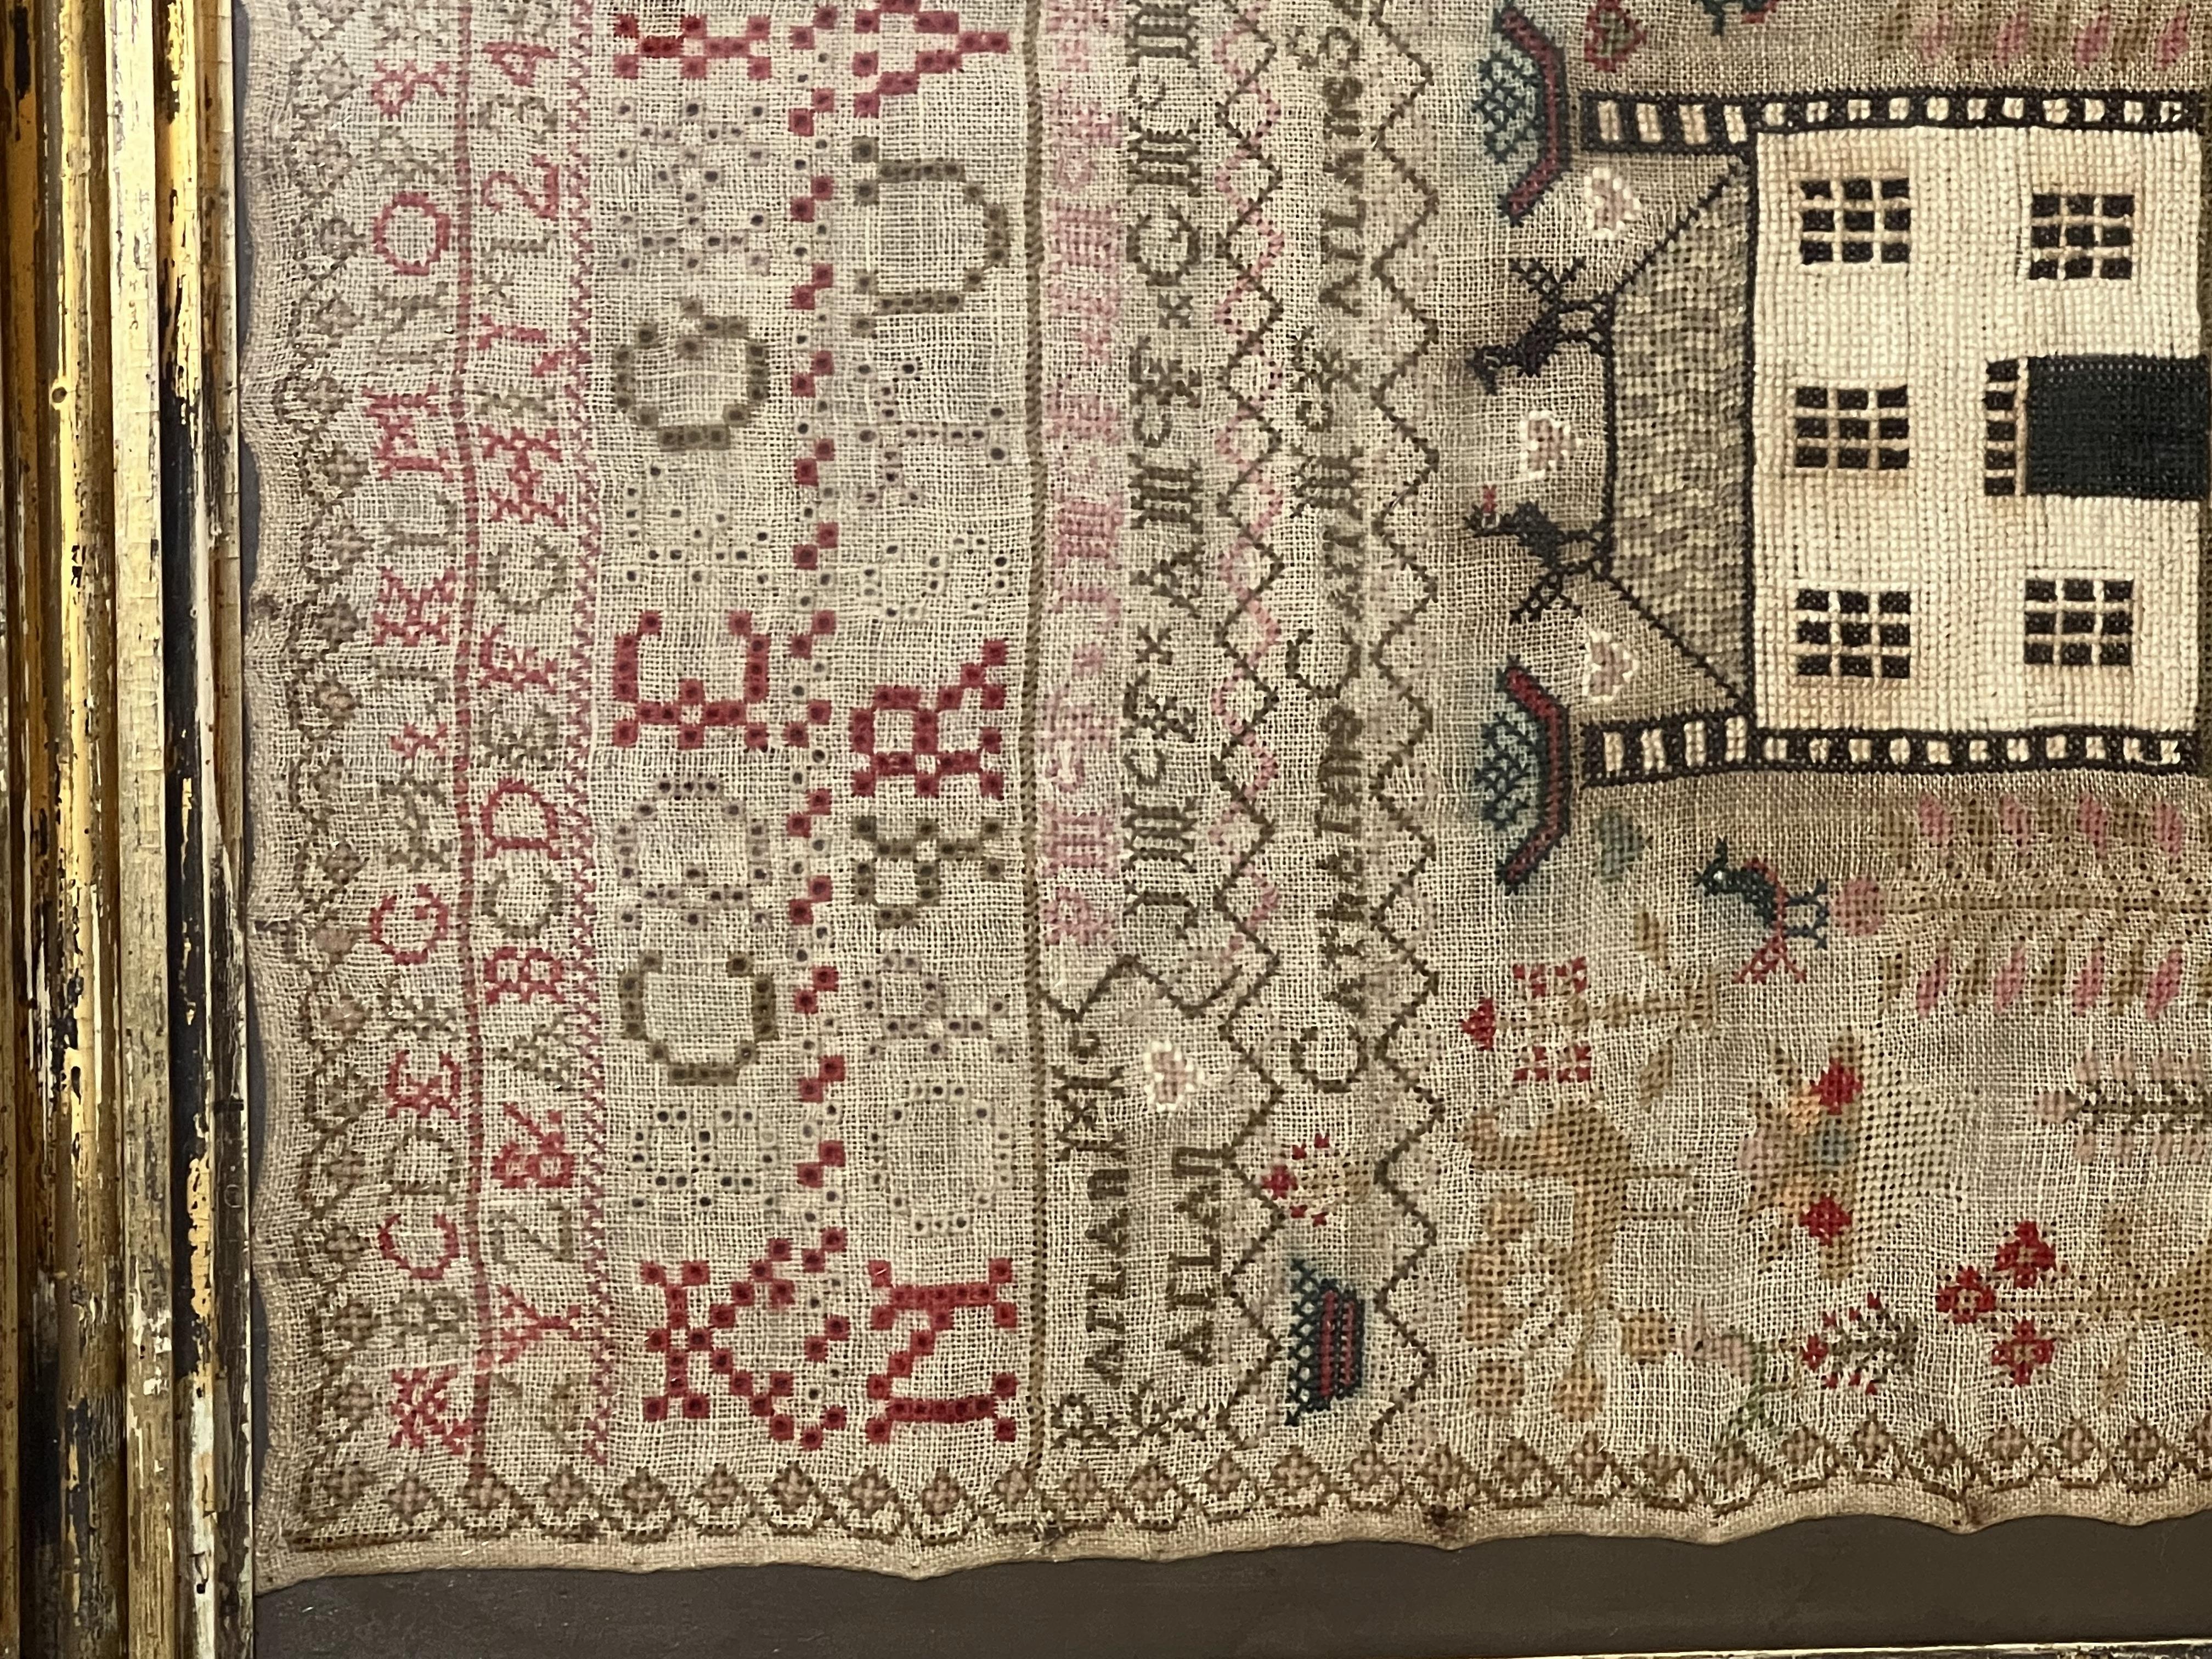 Catharine Carr McFarlan made this at the age of 13 or 14. She is listed in Scottish records as born about 1822 and living with her mother Agness in 1861. This schoolgirl sampler features multiple stiches, alphabets, numbers, birds, a picture of a